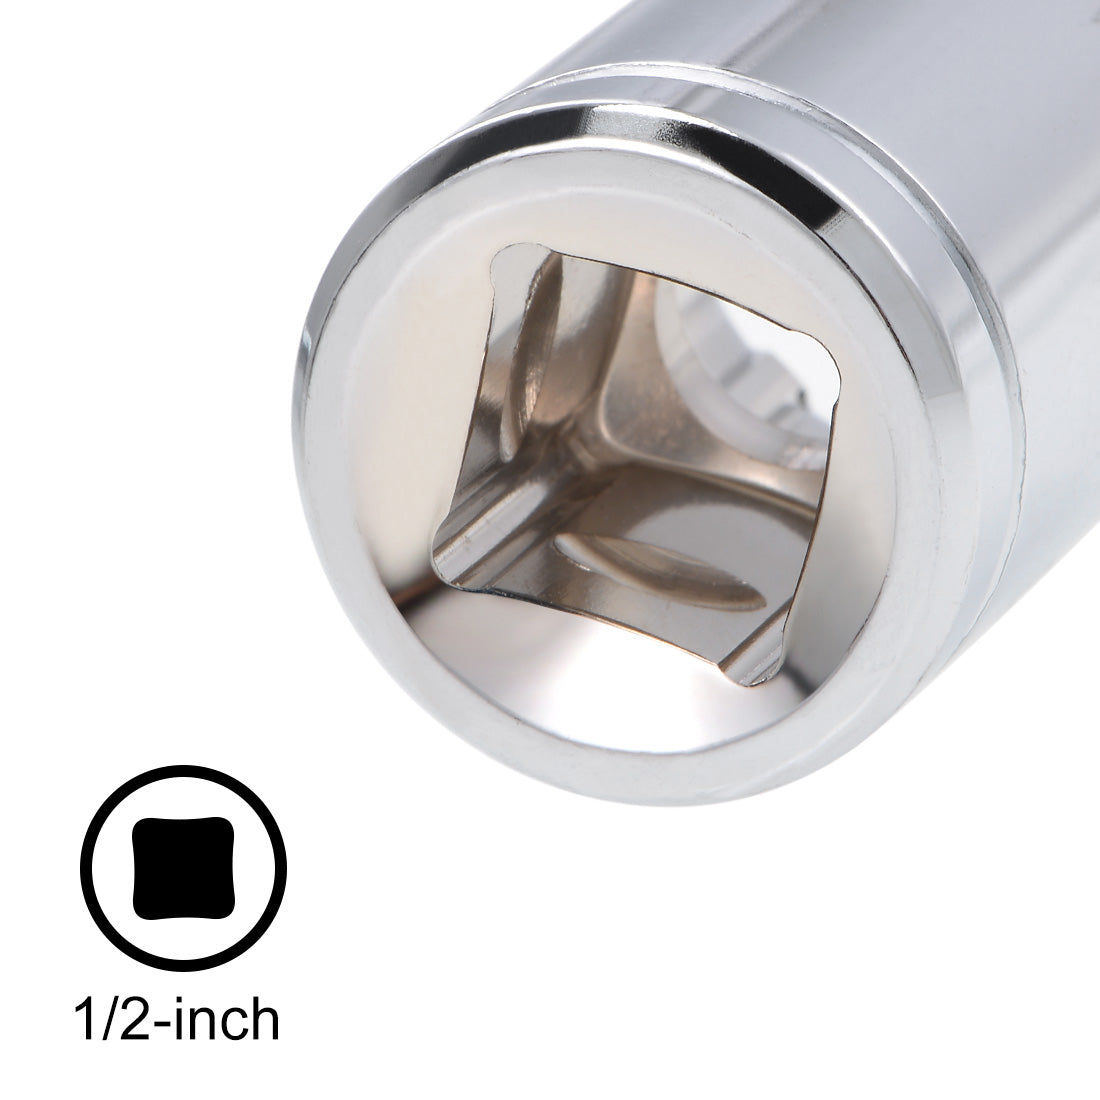 uxcell Uxcell 1/2-inch Drive E10 Universal Spline Socket Shallow 12 Point Cr-V Steel